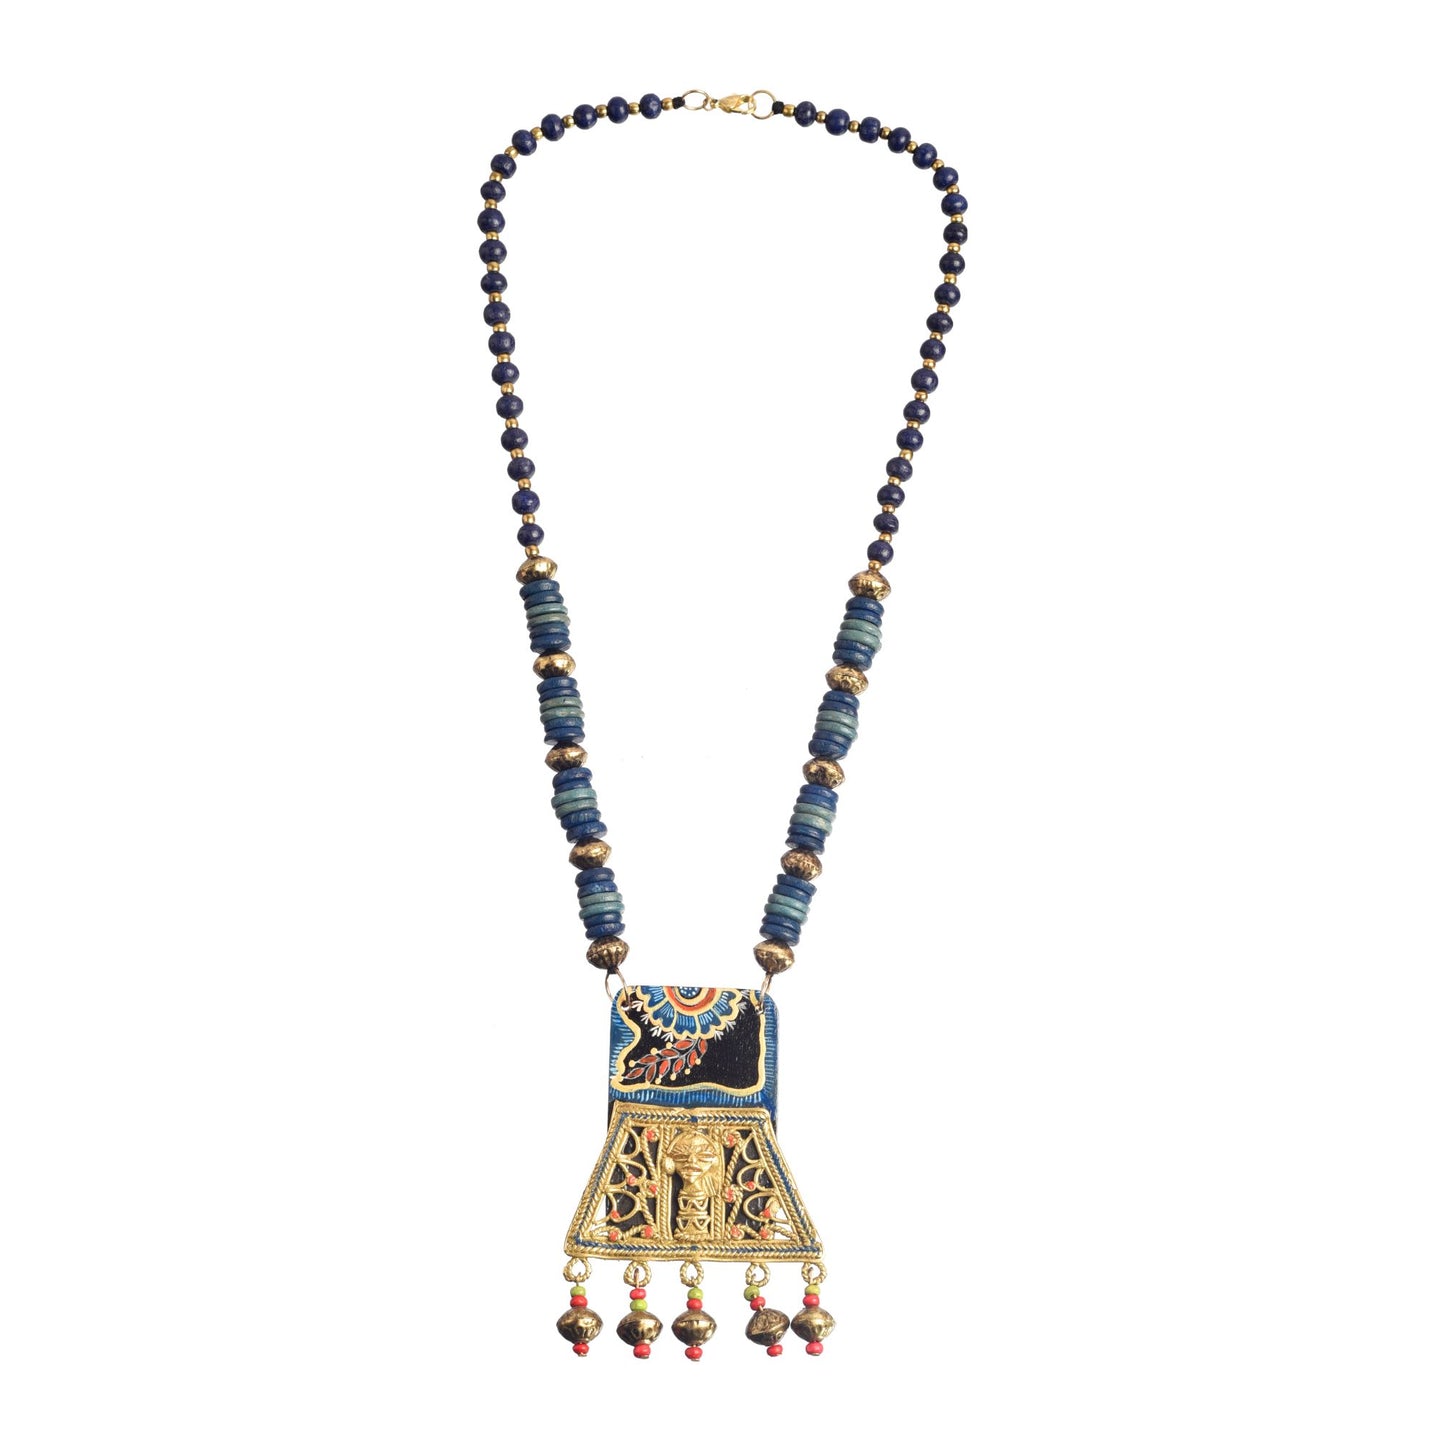 The Noble Queen Handcrafted Tribal Necklace